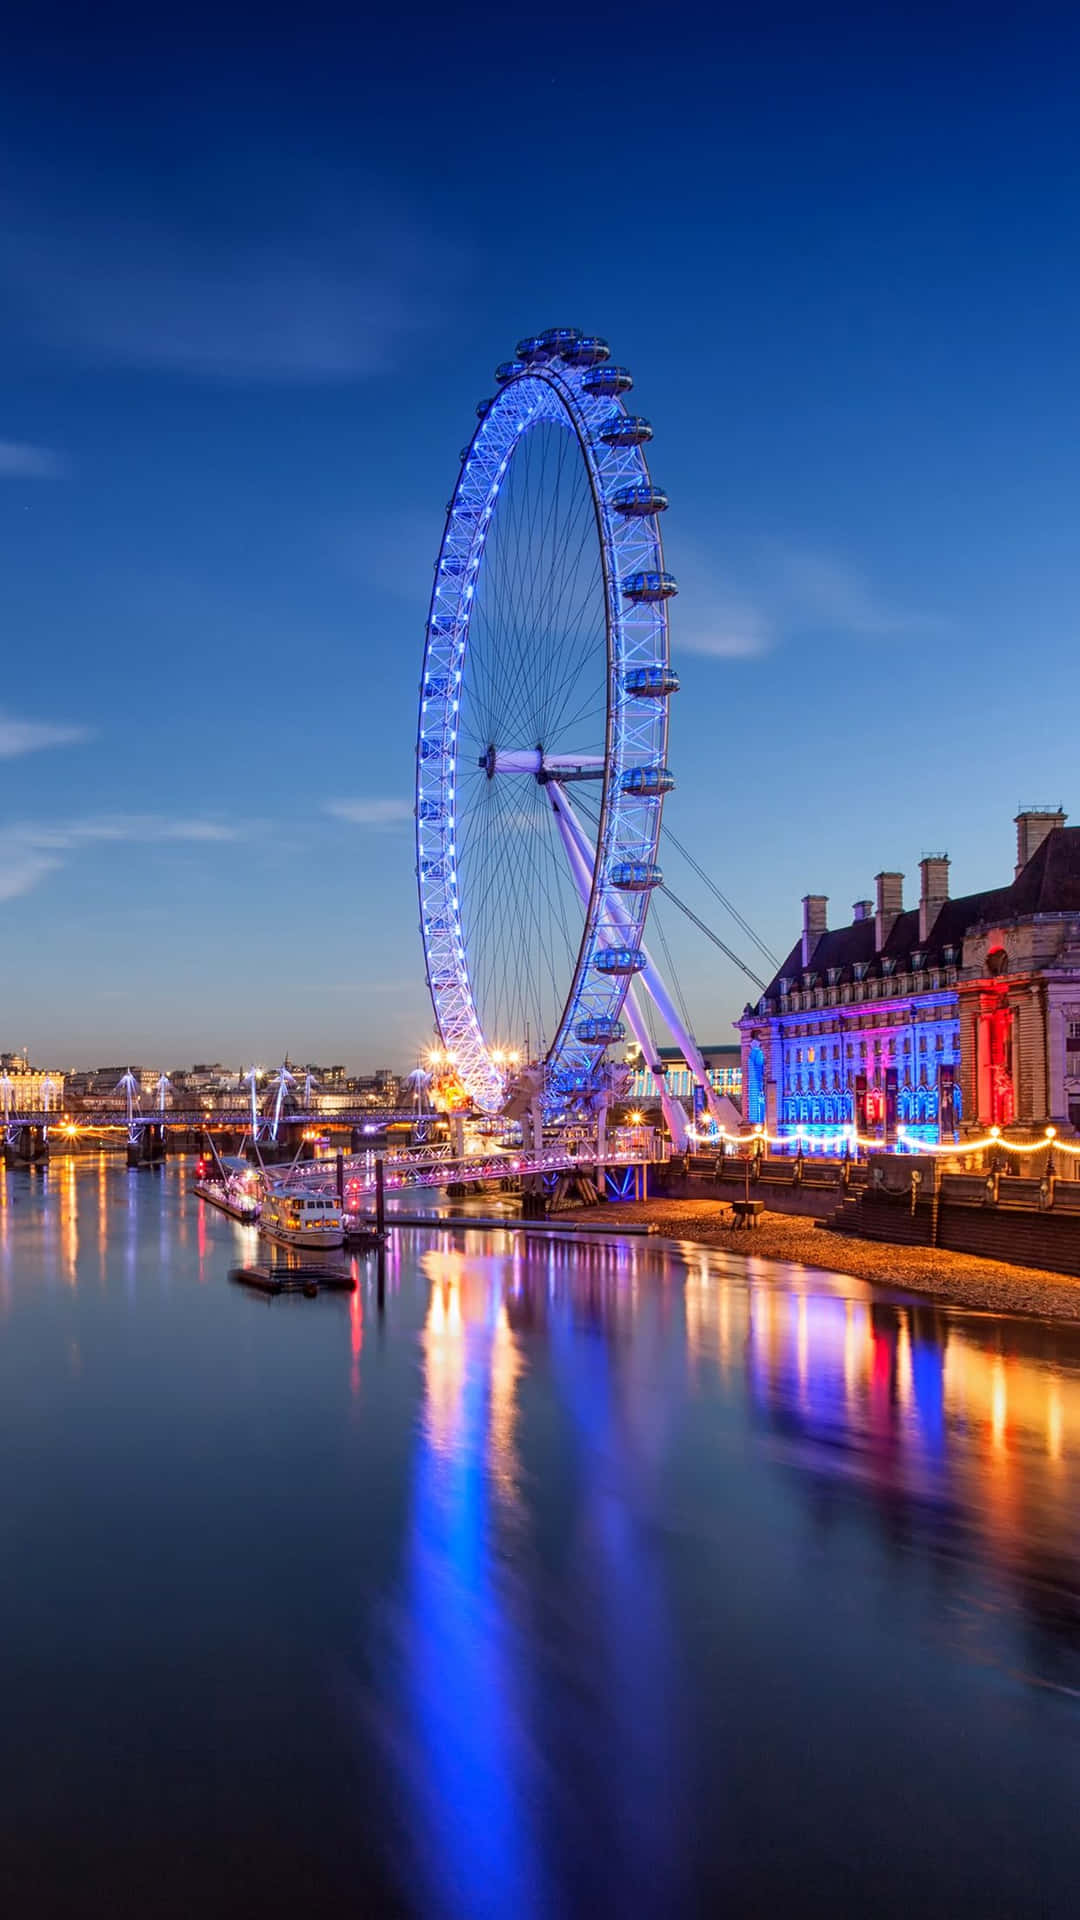 Bask in the Beauty of London with an iPhone Wallpaper